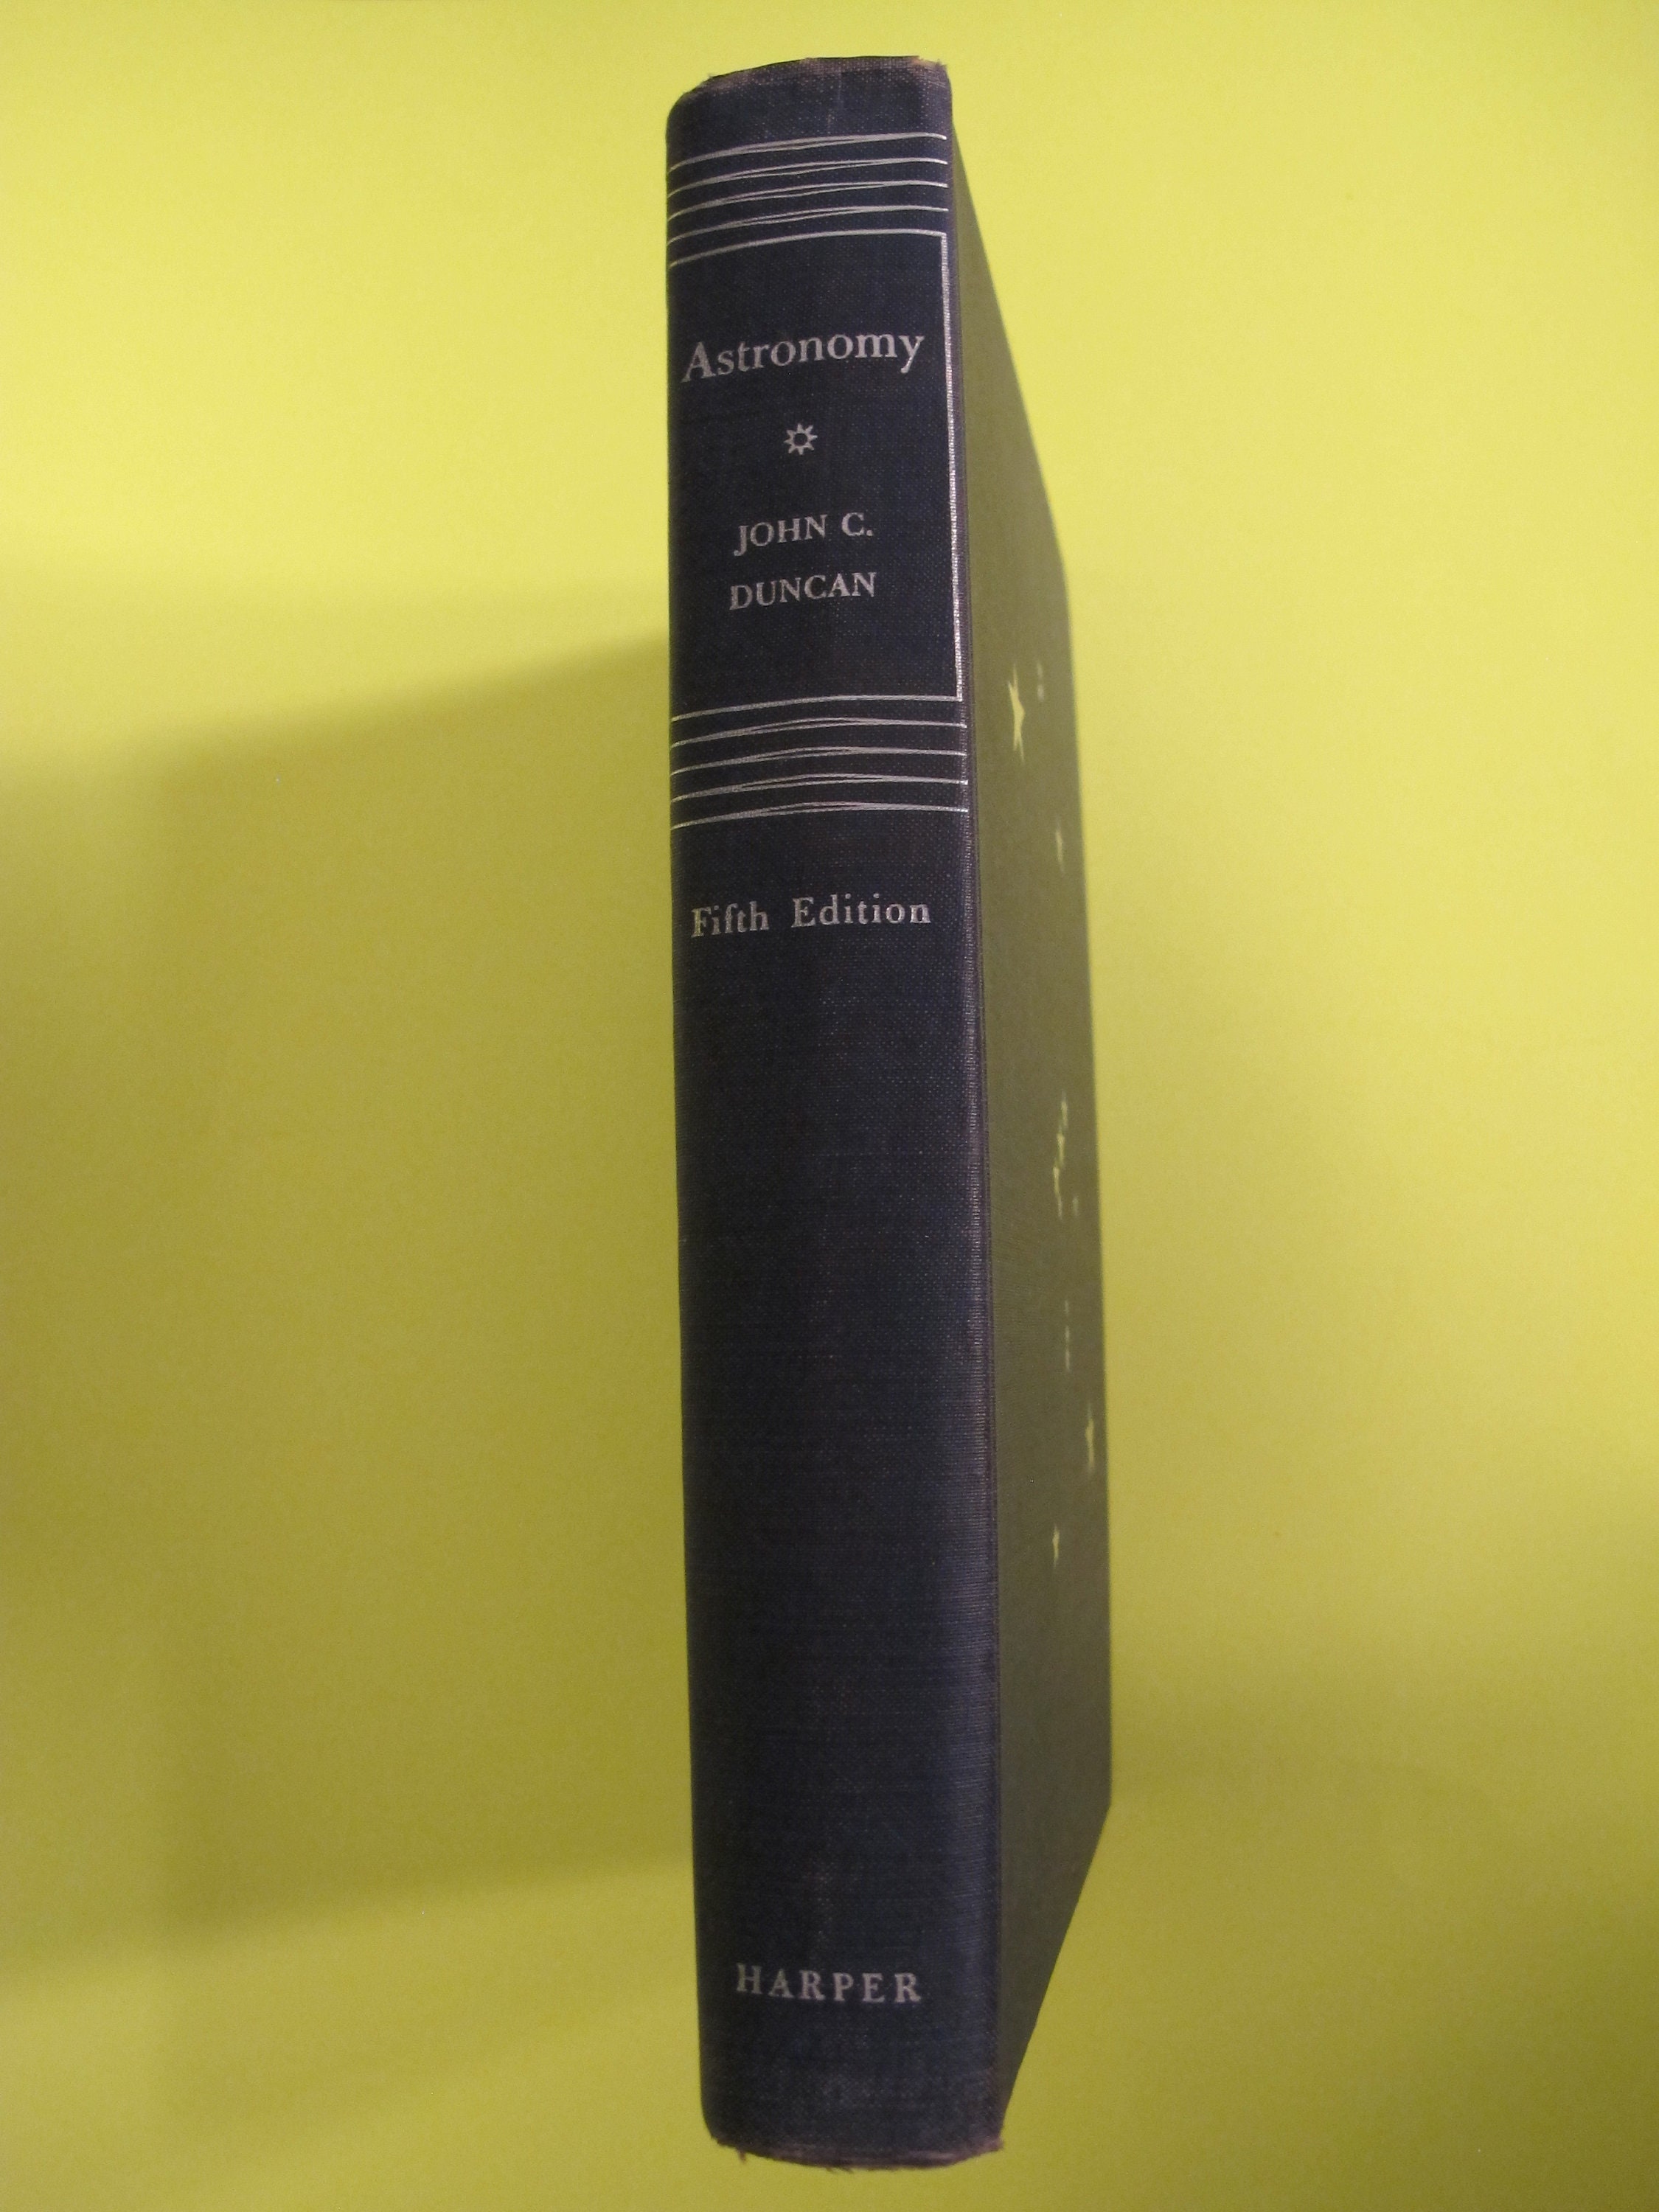 Astronomy By John C. Duncan Fifth Edition Very Good Condition | Etsy